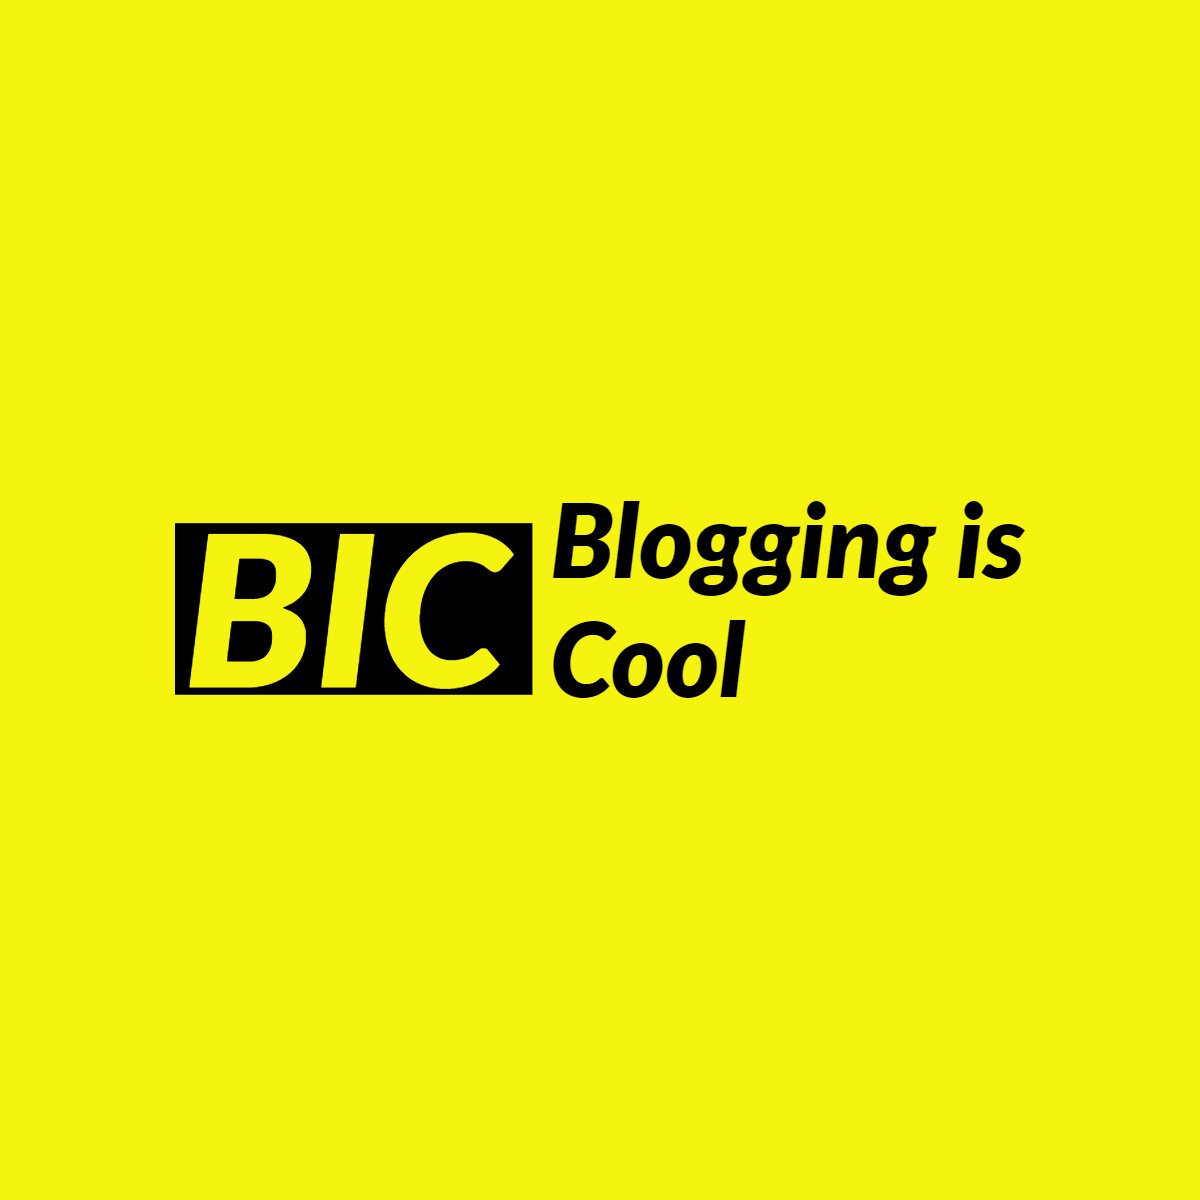 bloggingiscool.com Squarespace vs WordPress: Which One is Better for Your Blog?